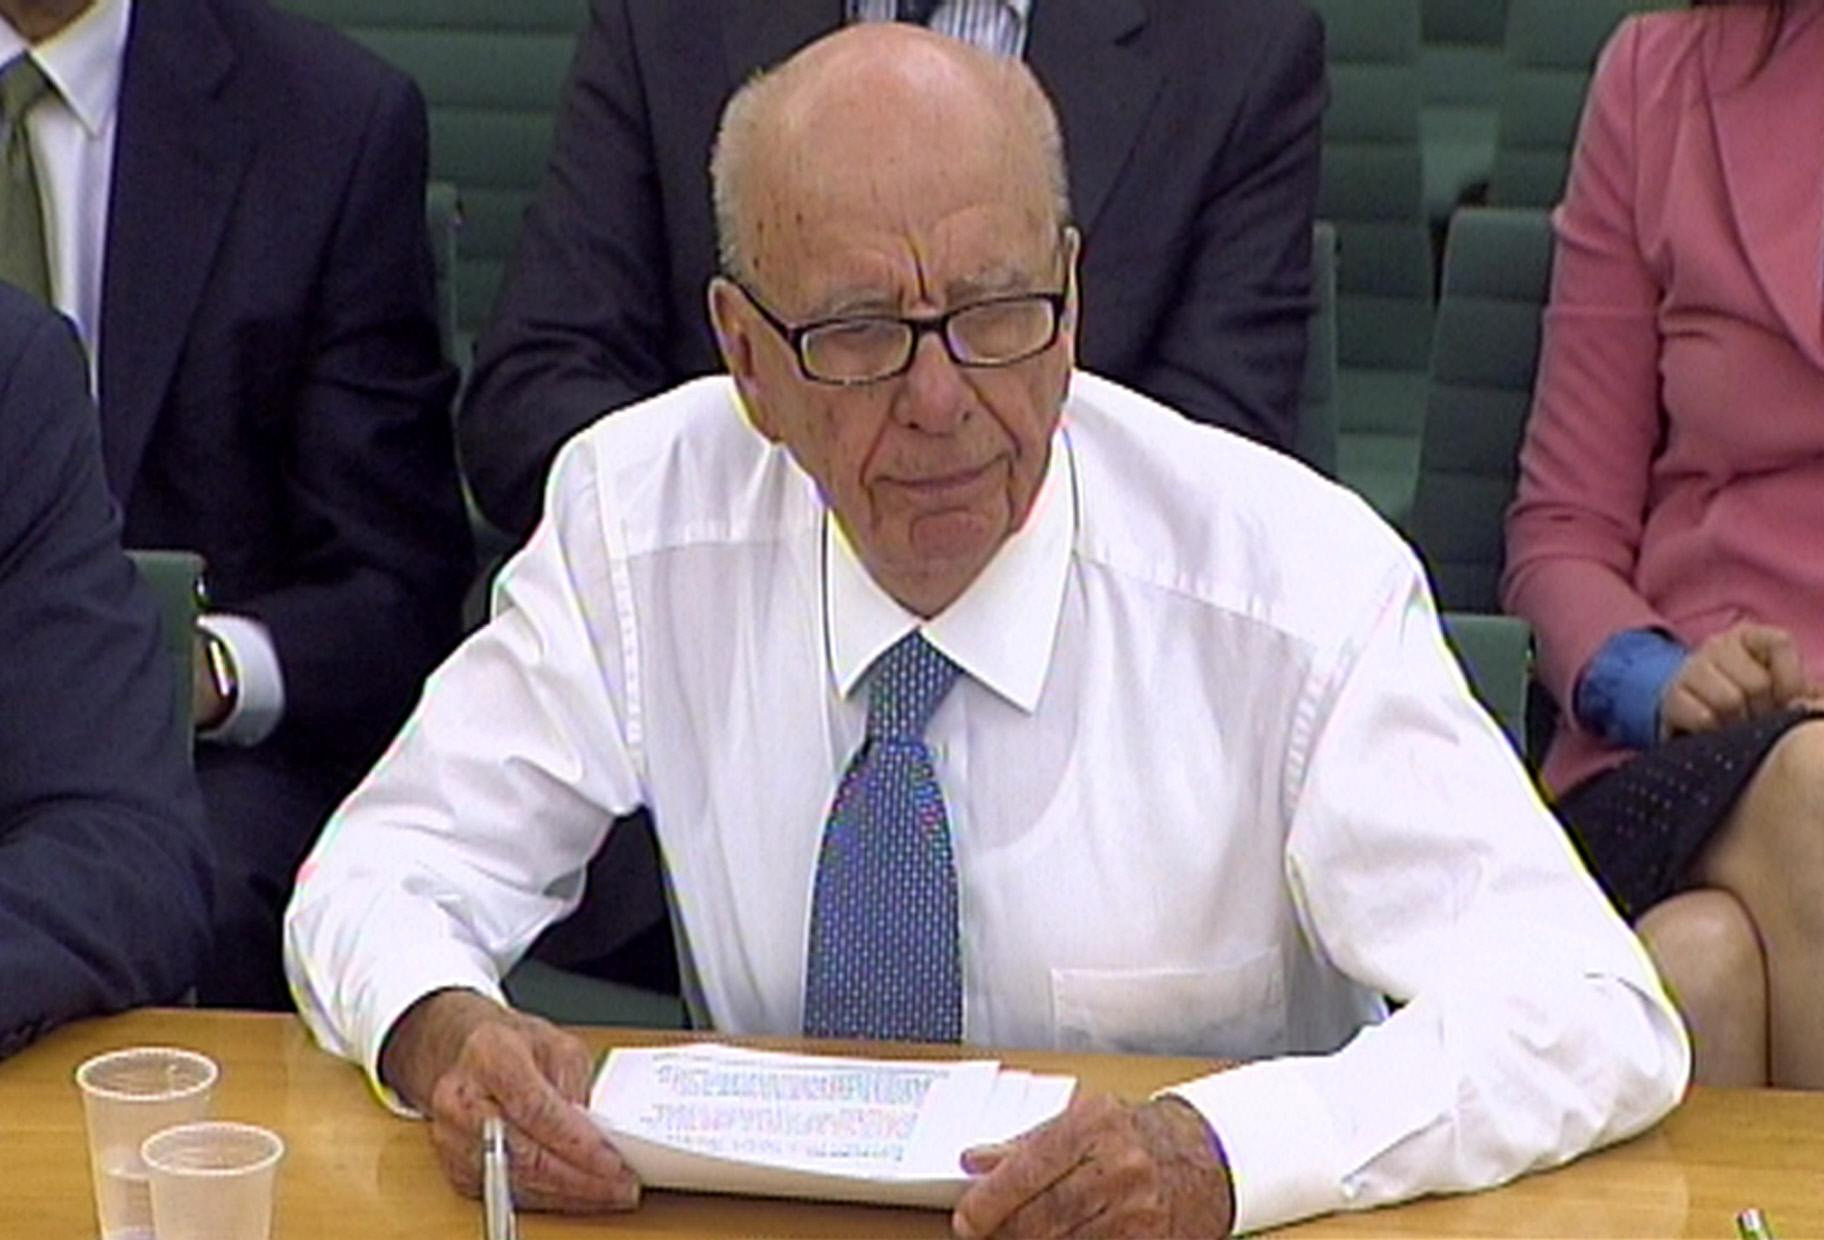 Murdoch Newspaper Spied On Lawyers Of Phone Hacking Victims The Blade